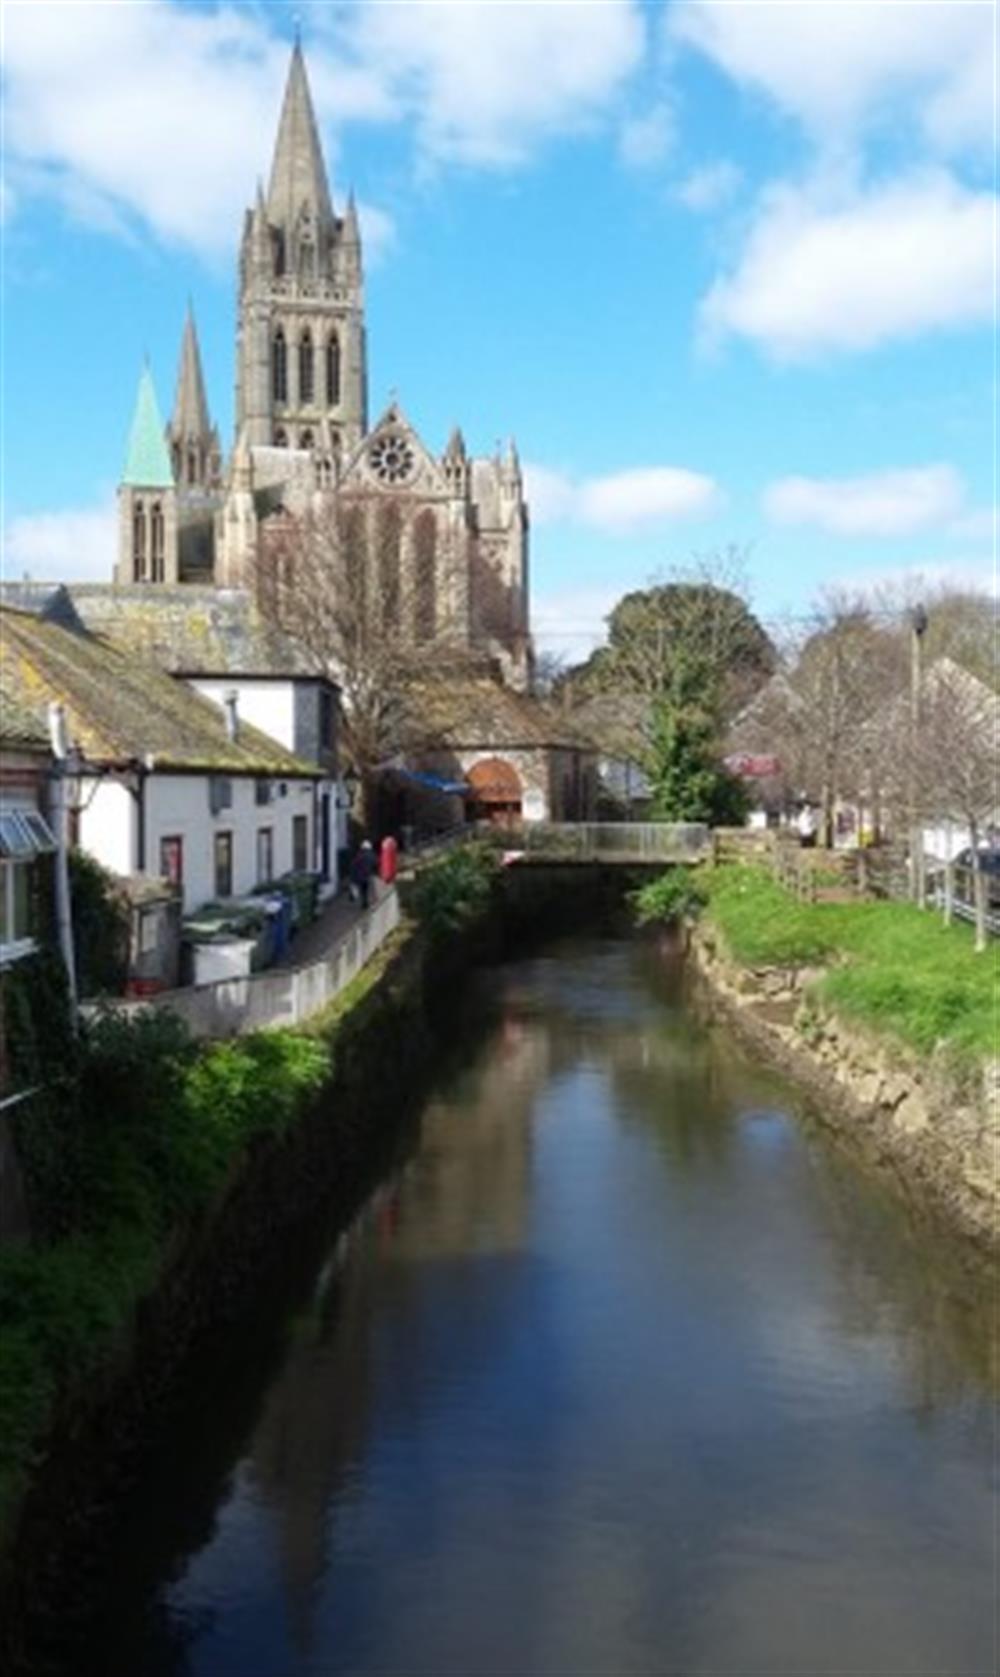 Truro is our main shopping centre. The cathedral is quite beautiful too!